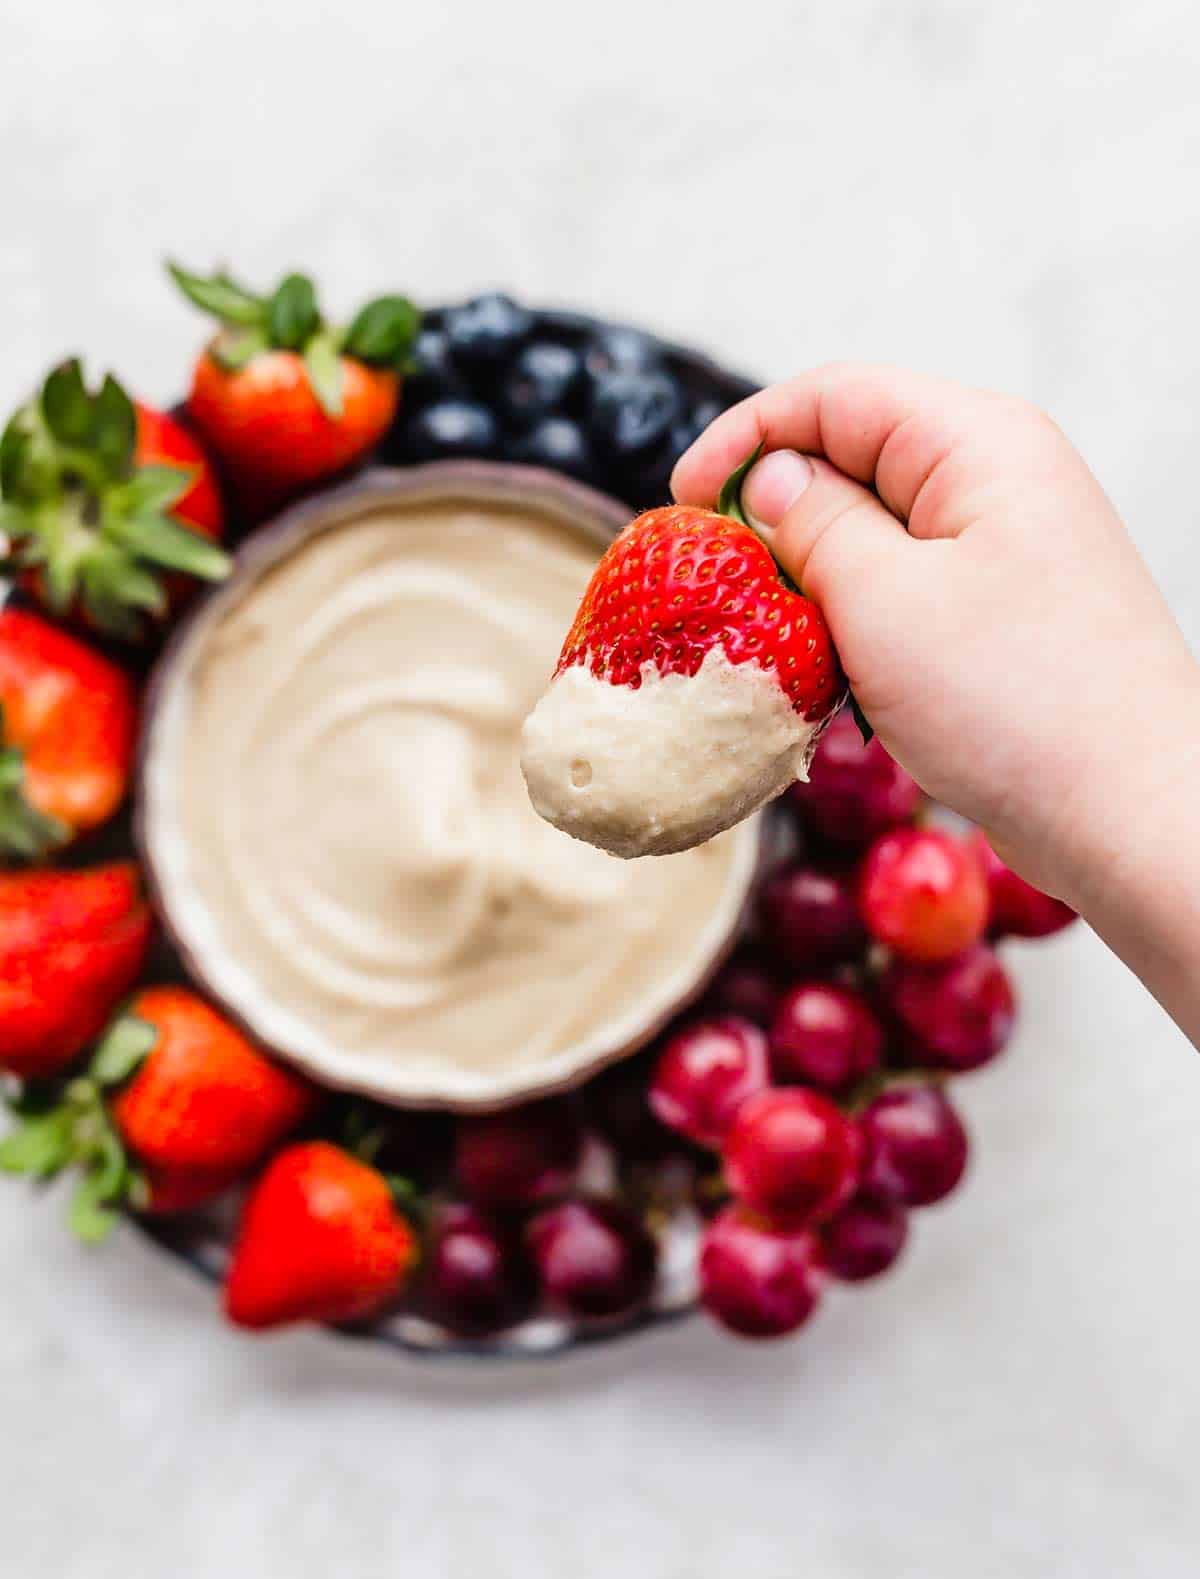 A hand dipping a strawberry into a tan colored Cream Cheese Fruit Dip.